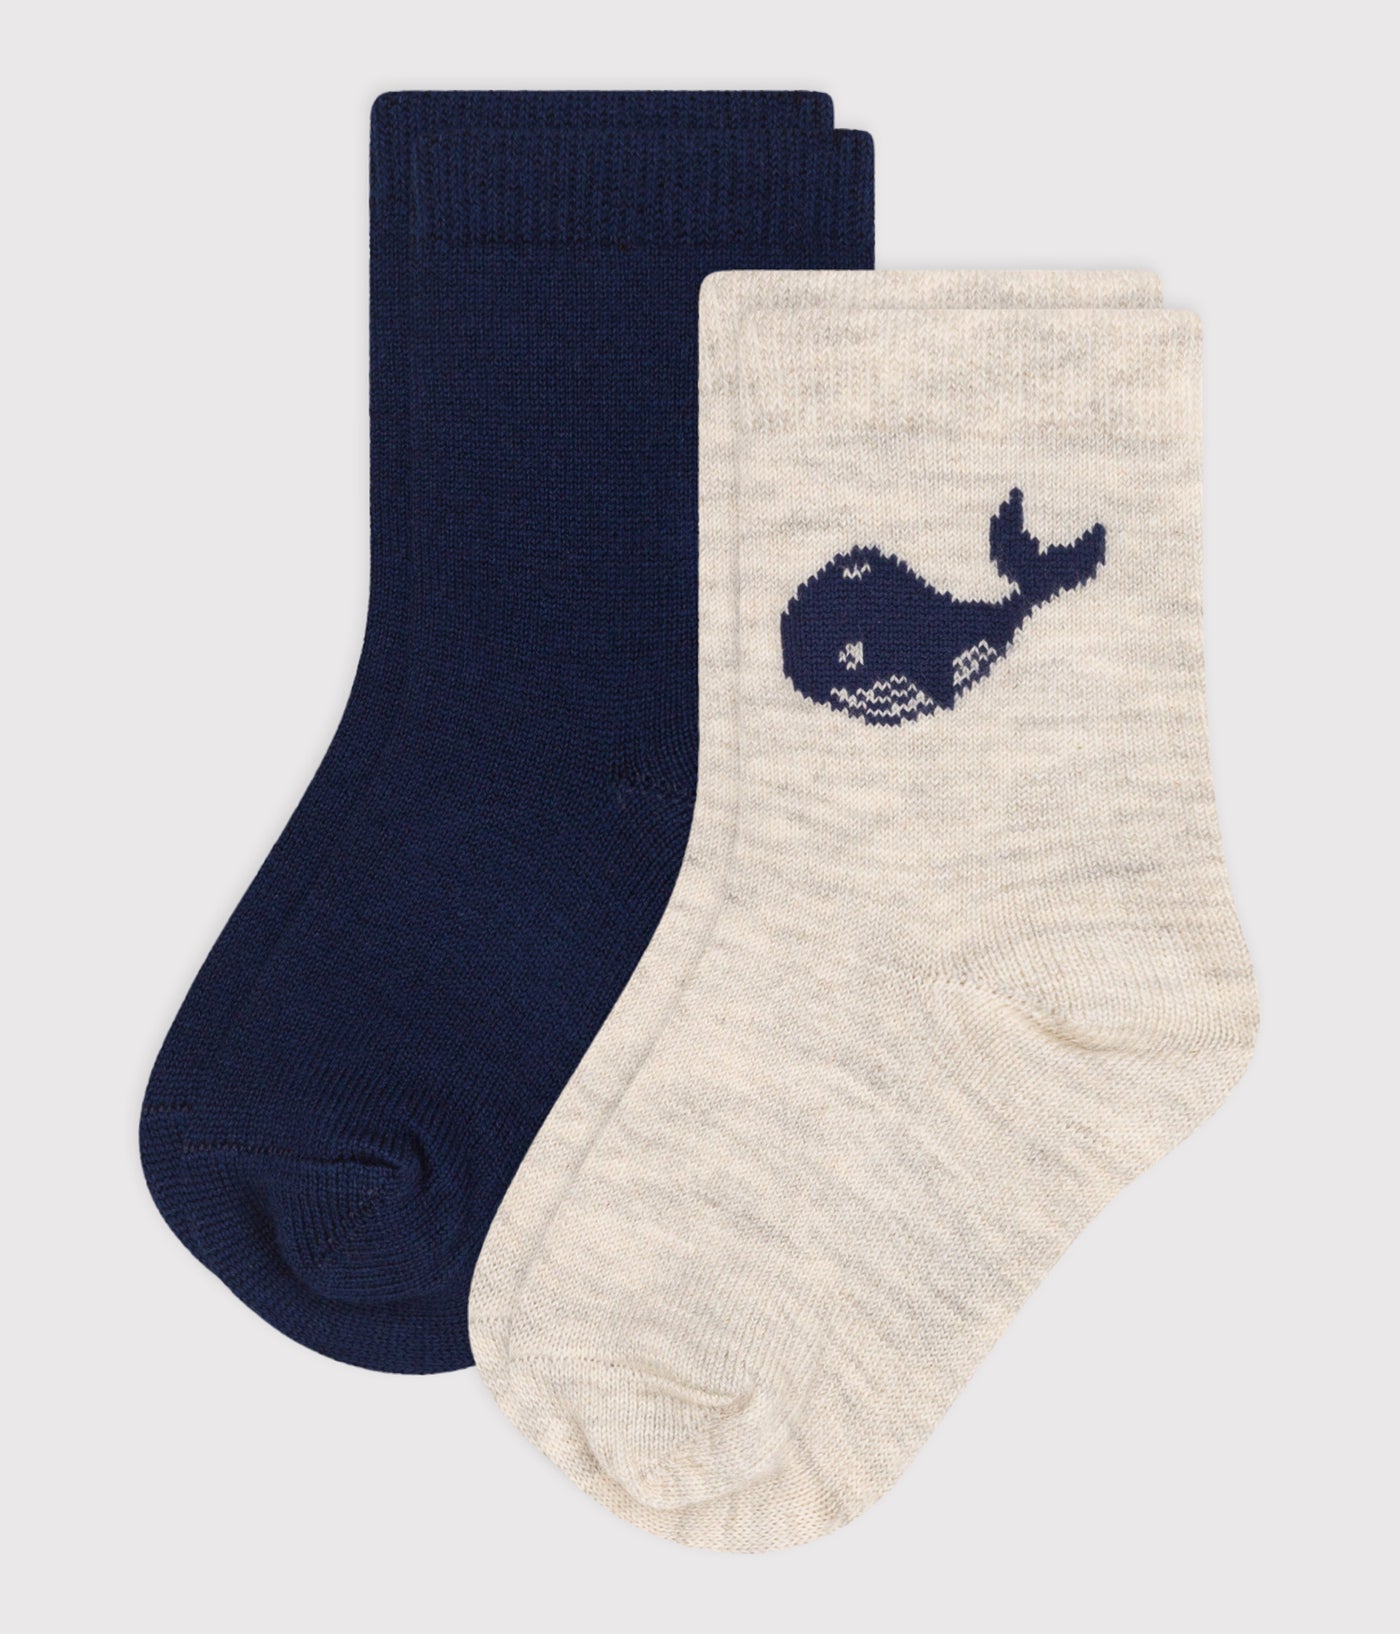 BABIES' WHALE COTTON SOCKS - 2-PACK